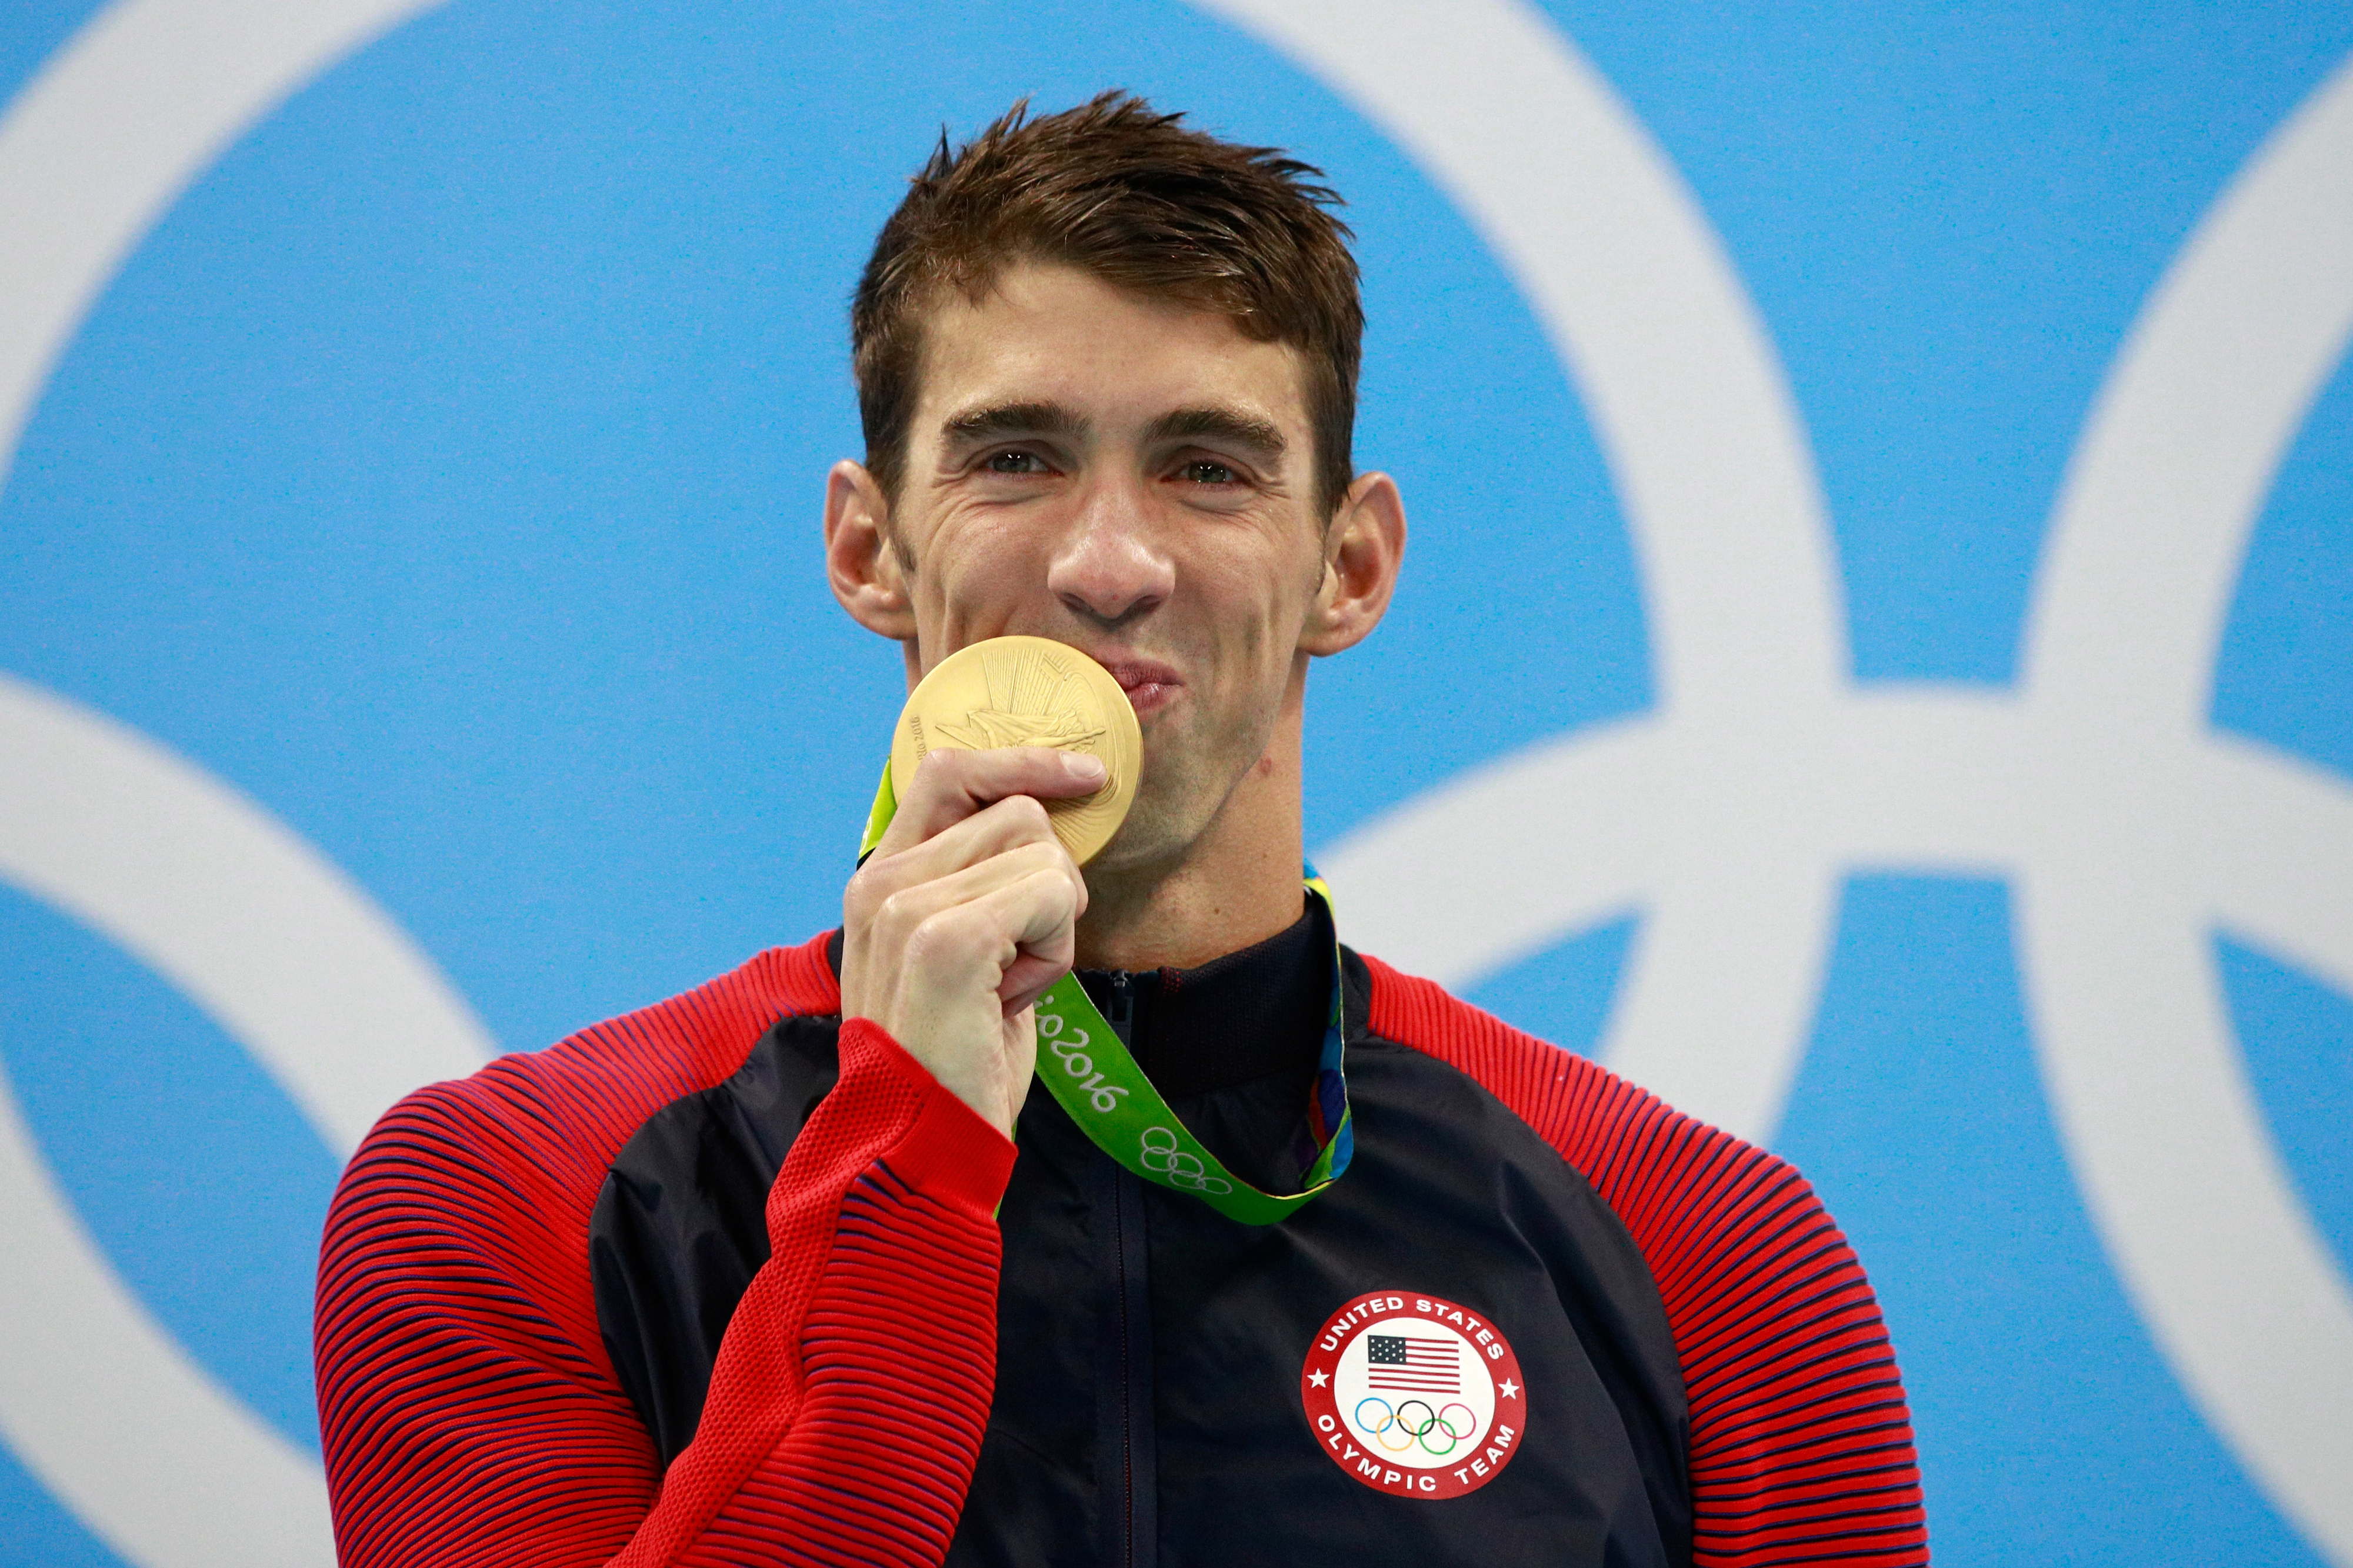 Closeup of Michael Phelps with his gold medal